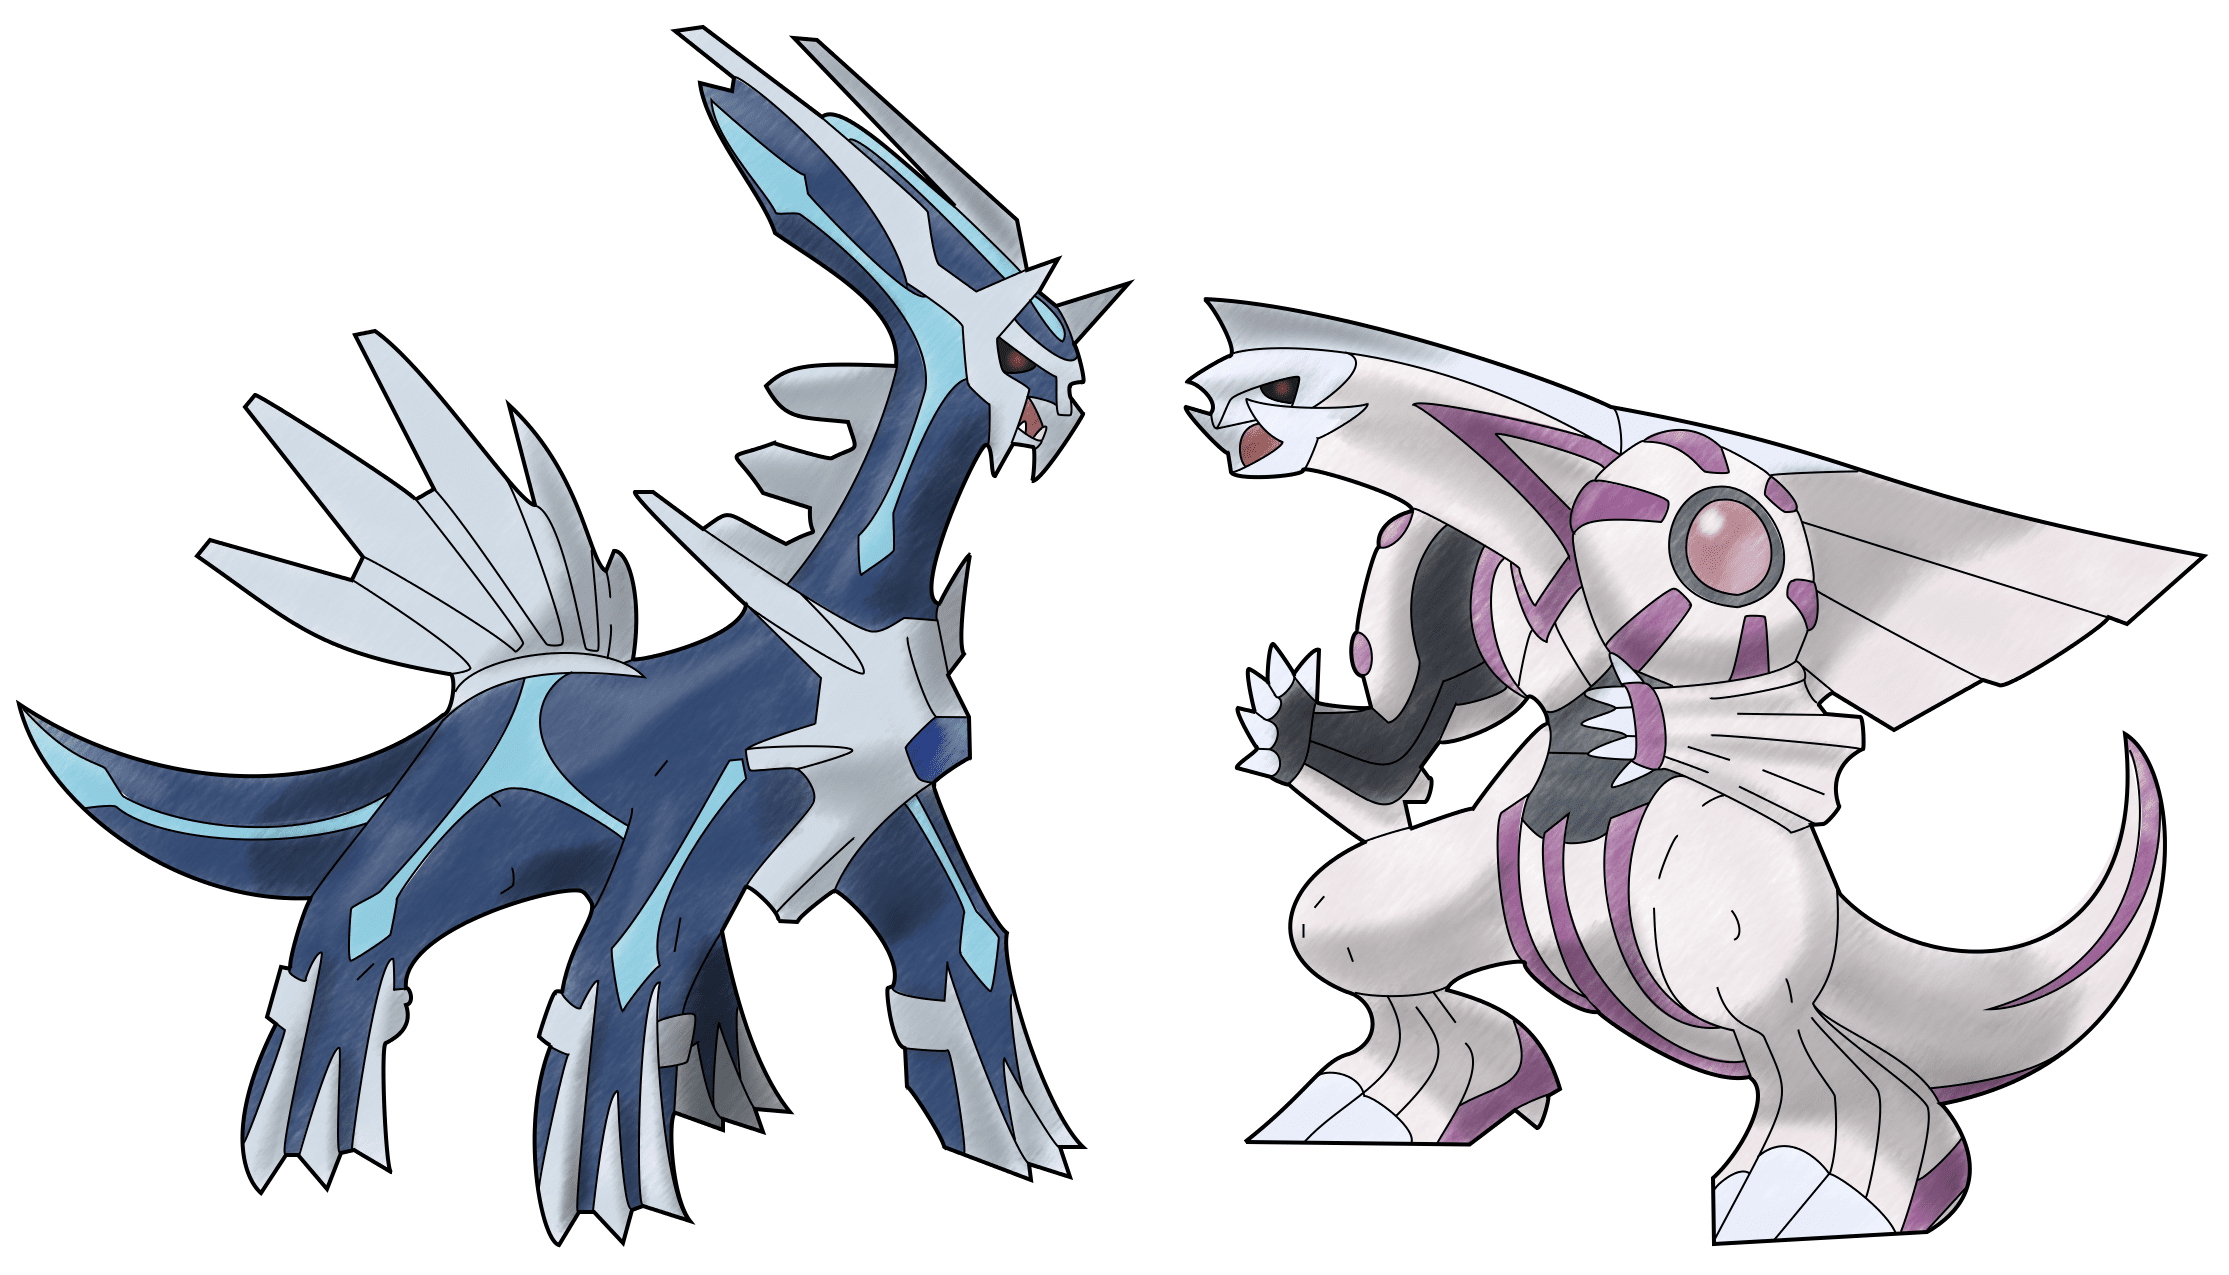 2229x1275 Pokemon Brilliant Diamond and Shining Pearl sales over 6 million in first week